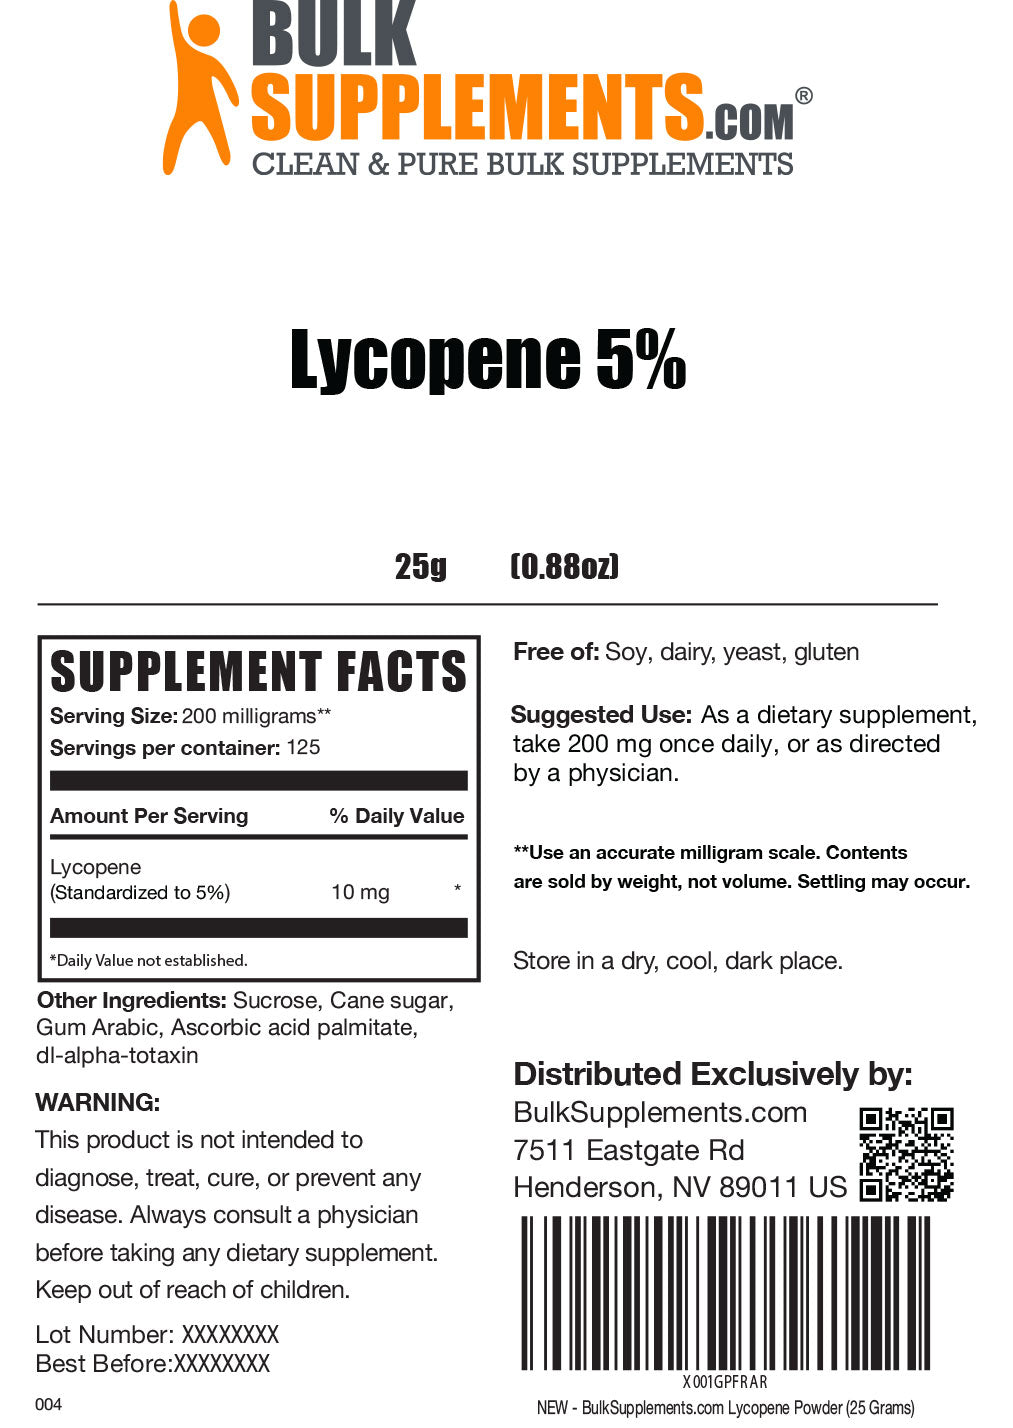 Lycopene supplement facts